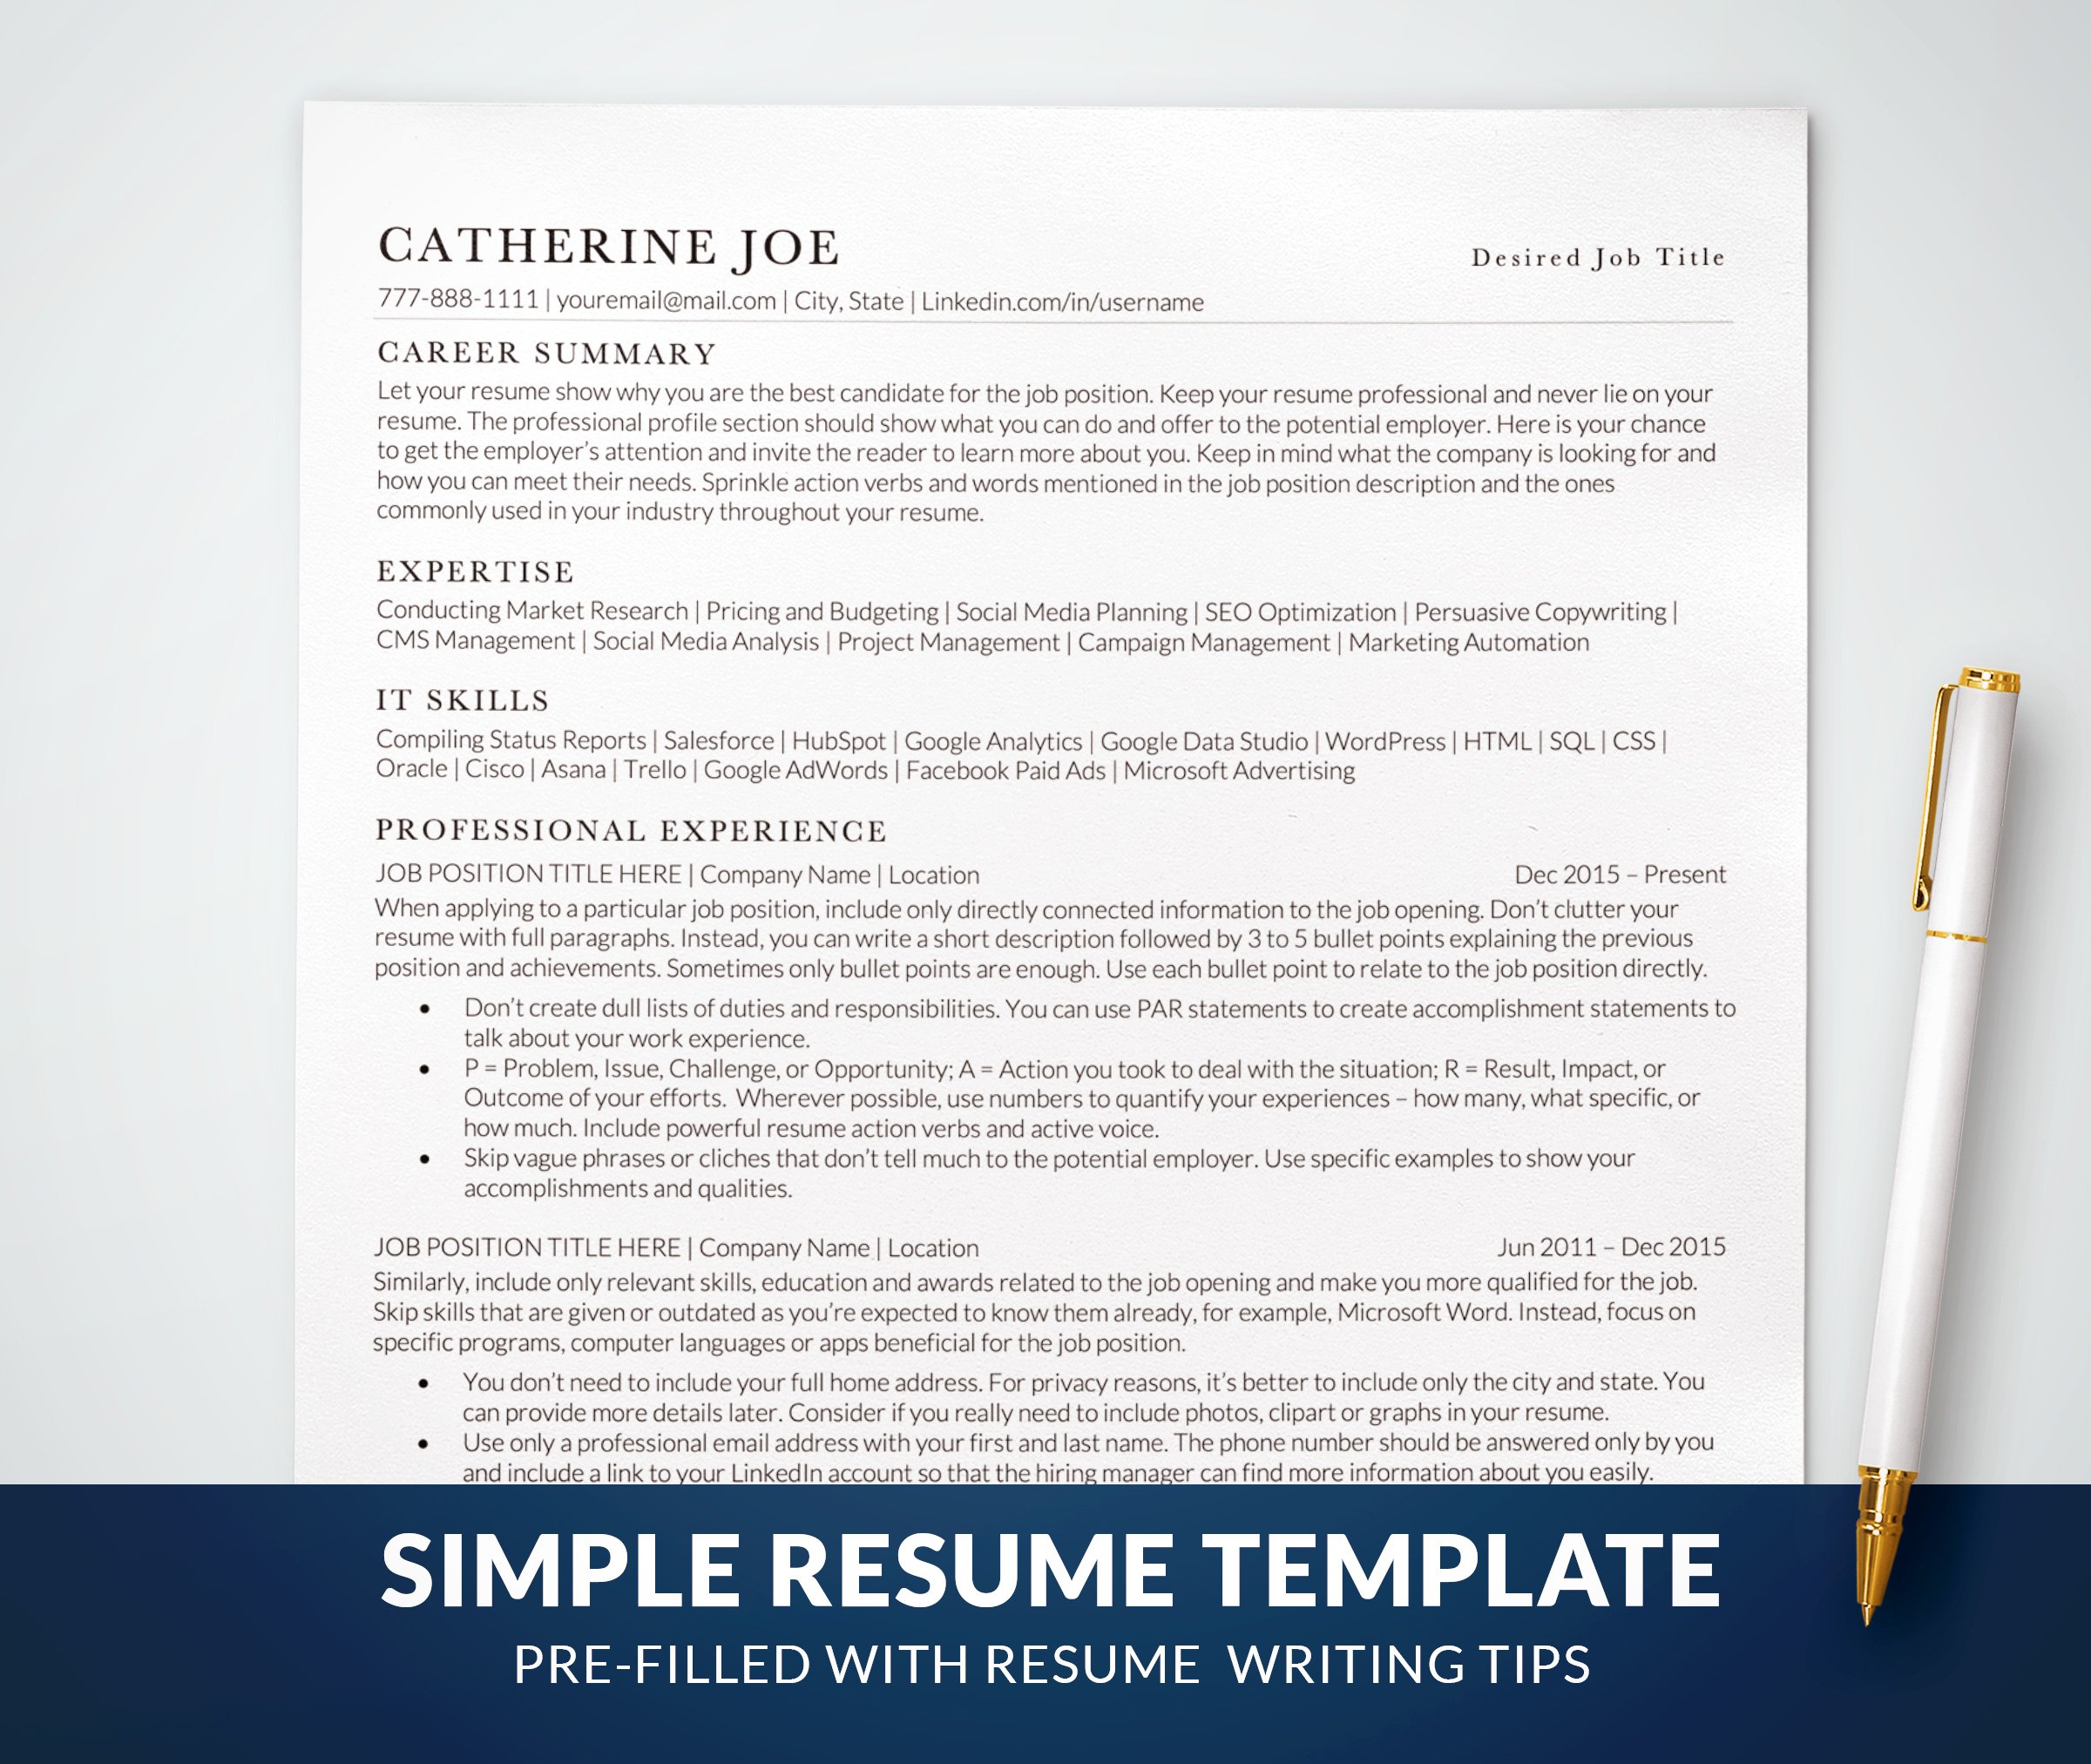 Simple Resume Template ATS cover image.